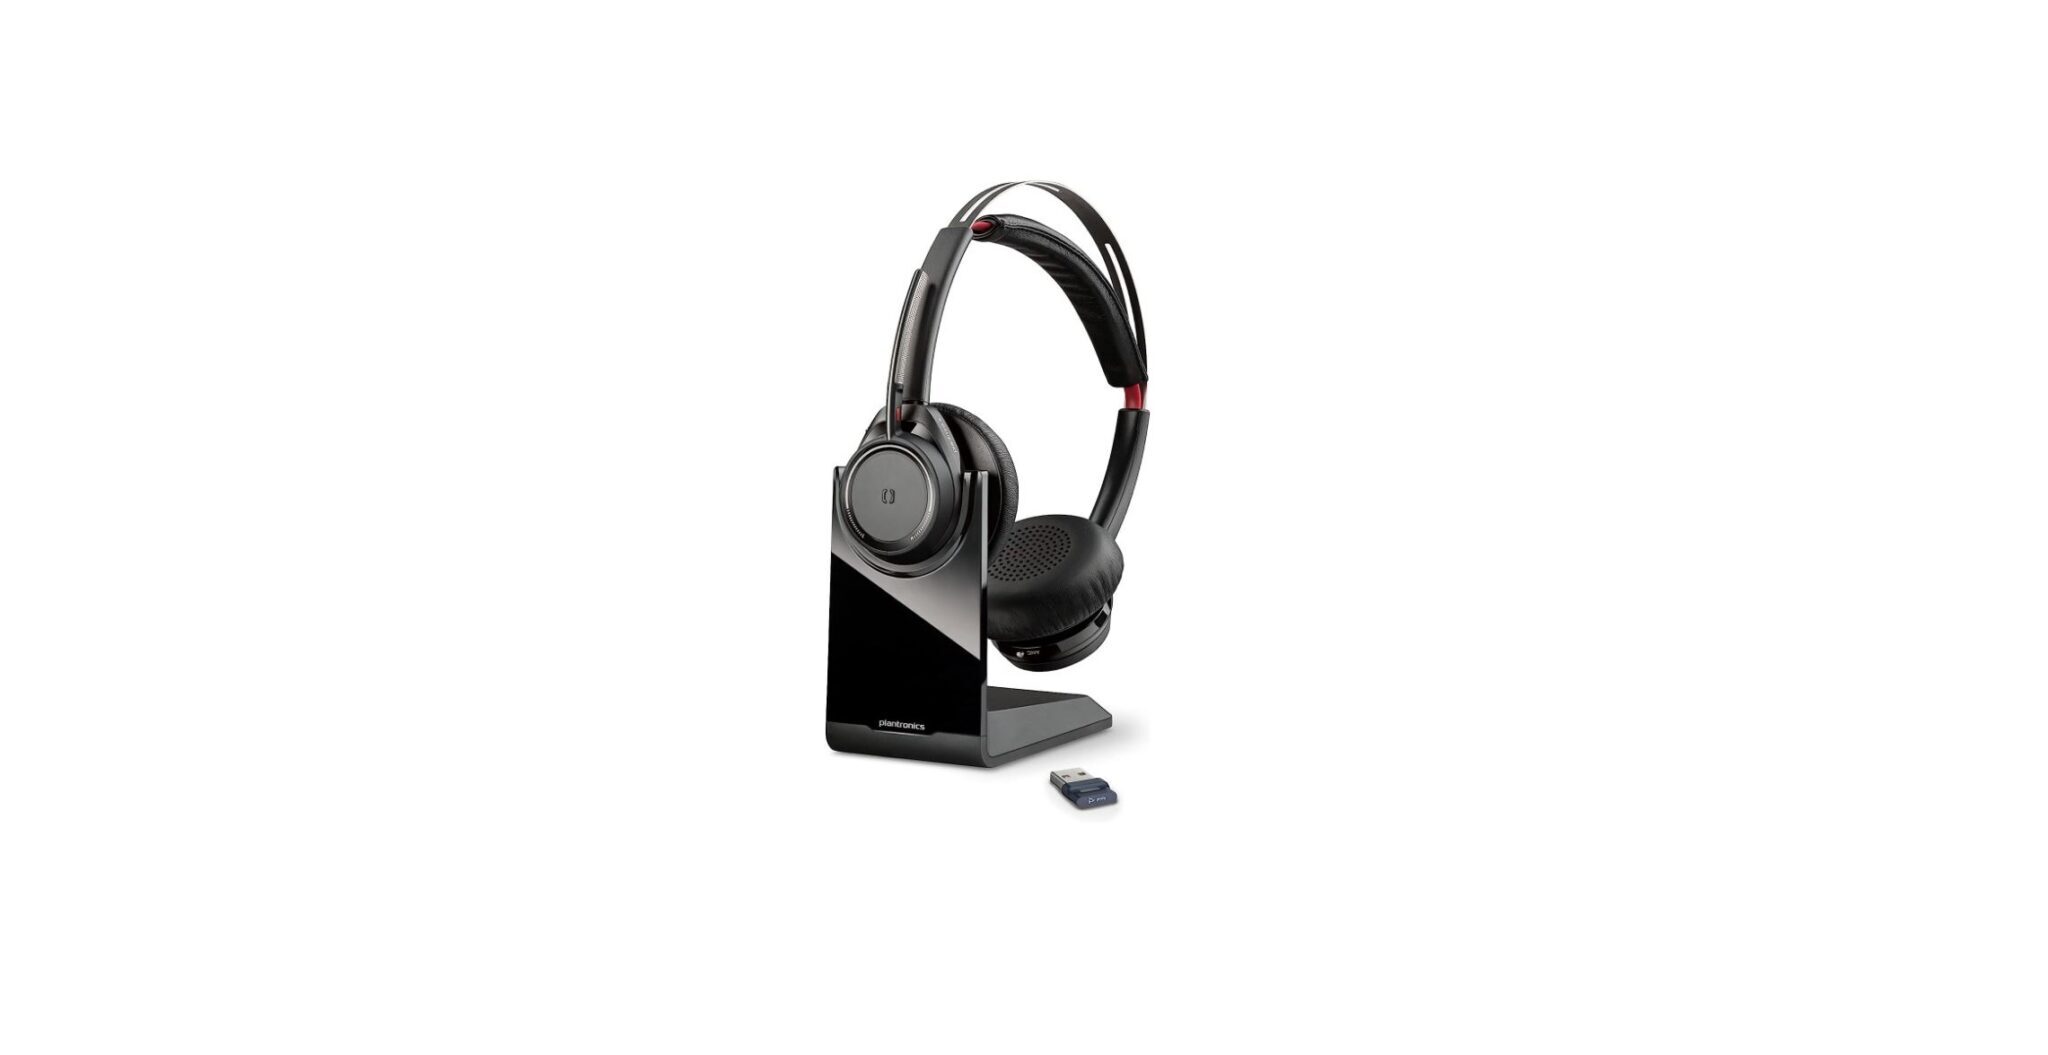 2-202652-333 Poly Voyager Focus UC Wireless Headset